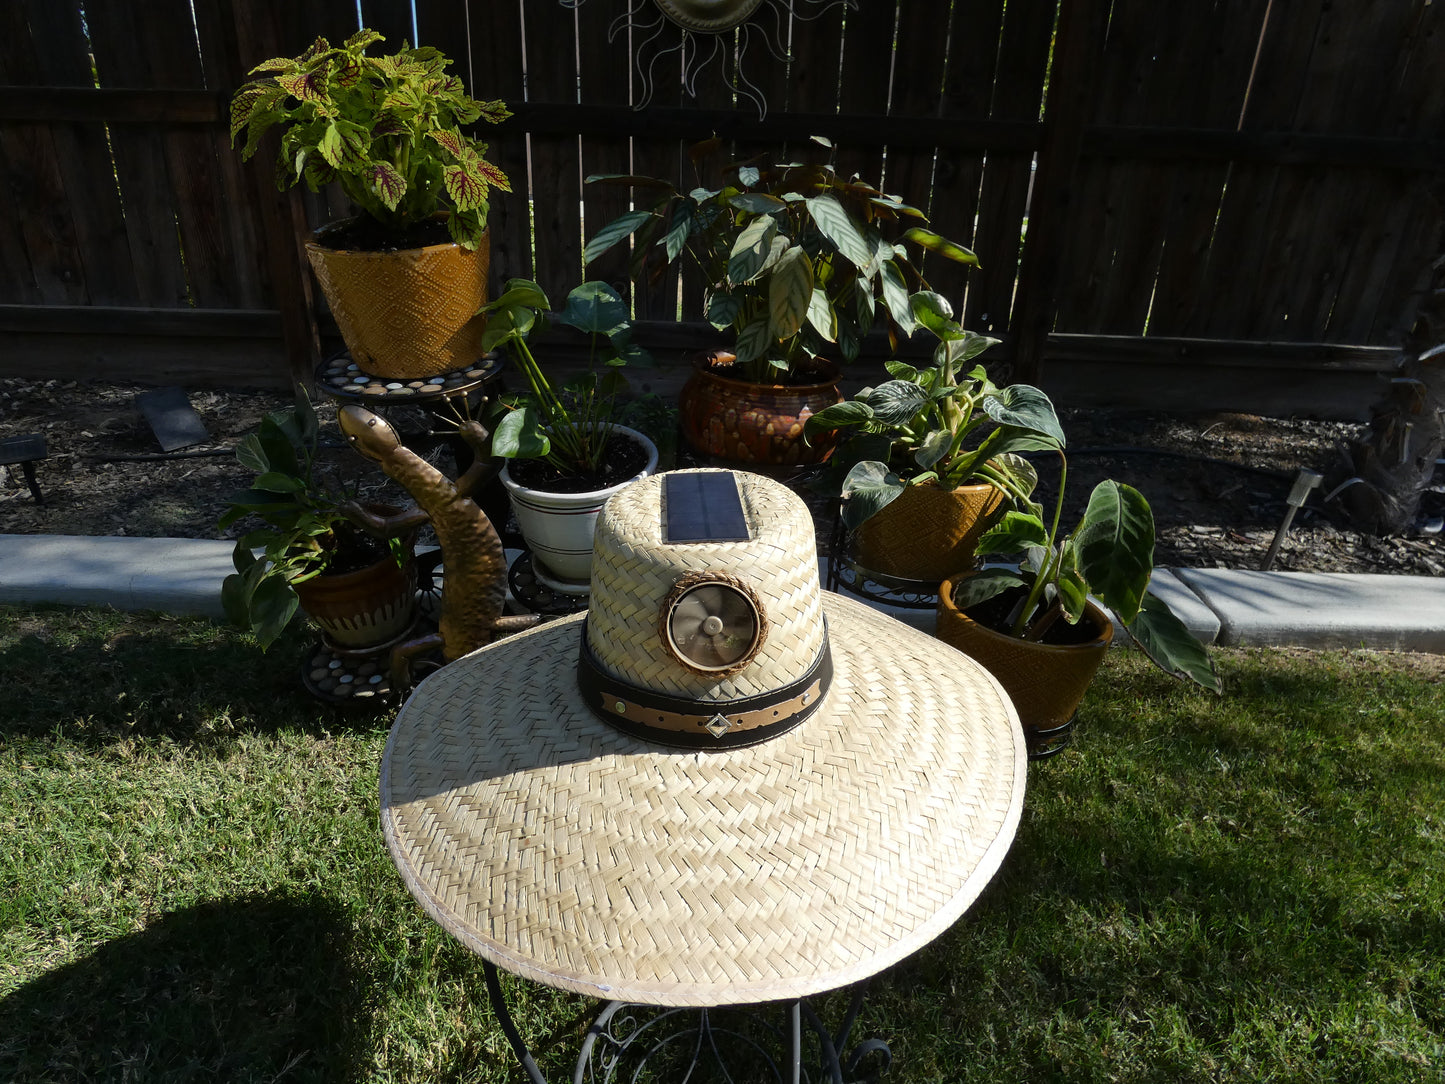 Men's Gardener with Band Solar Hat - Sun Hat with Fan, One Size